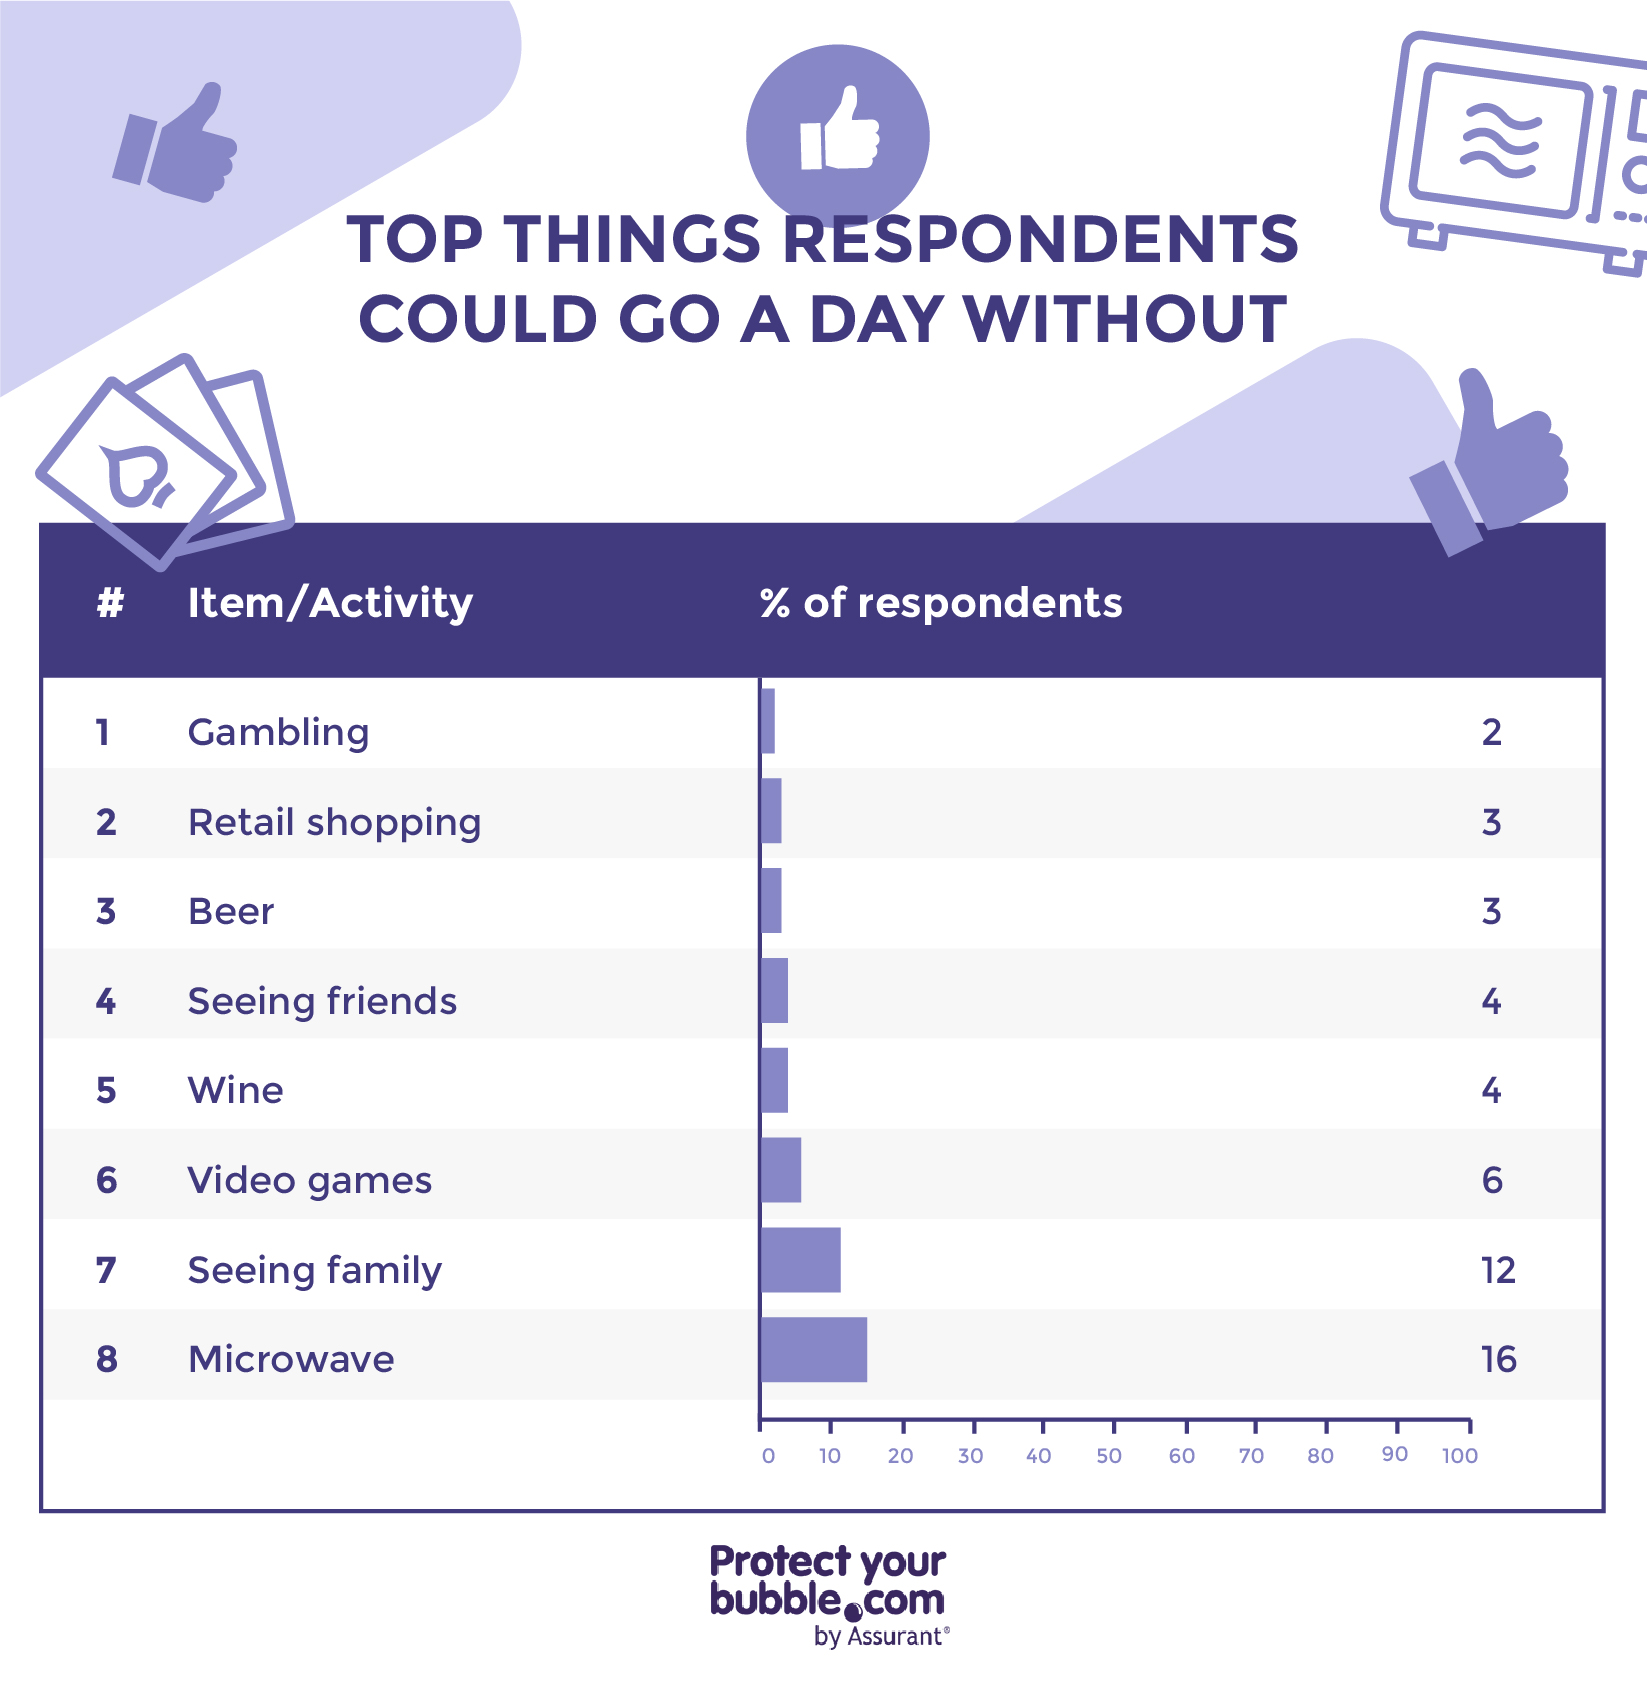 image showing things respondents could go a day without